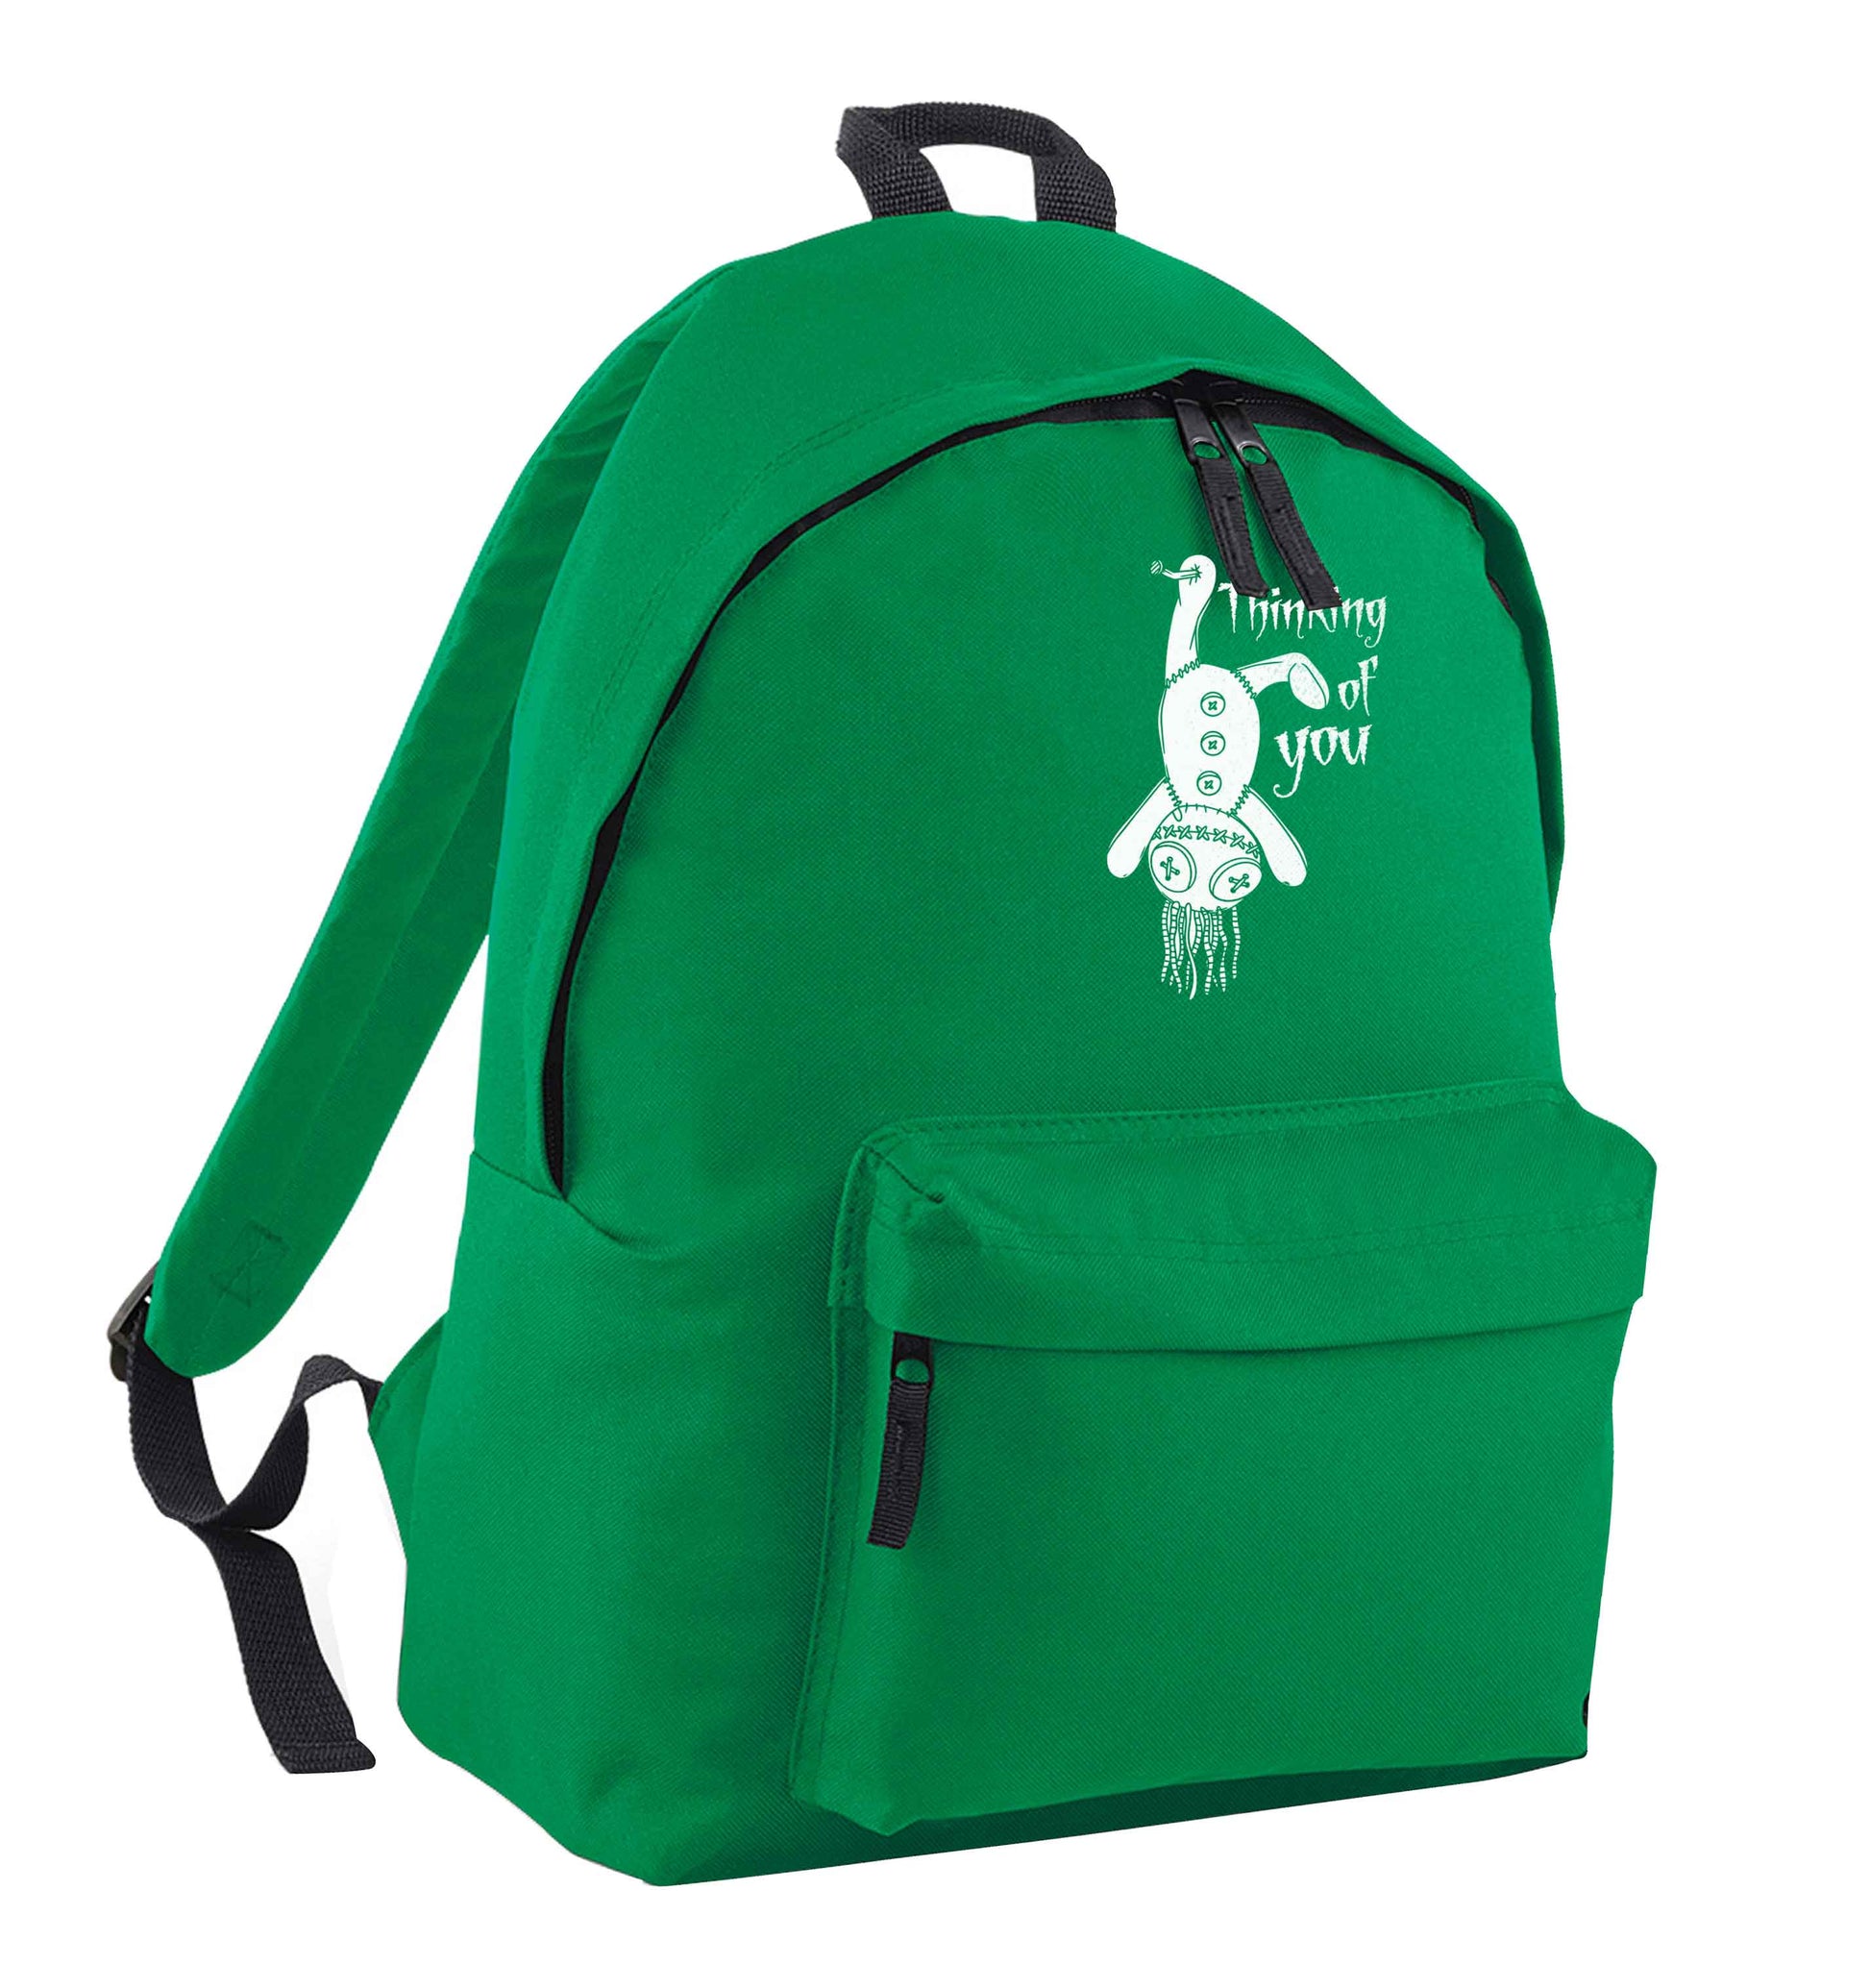 Thinking of you green adults backpack